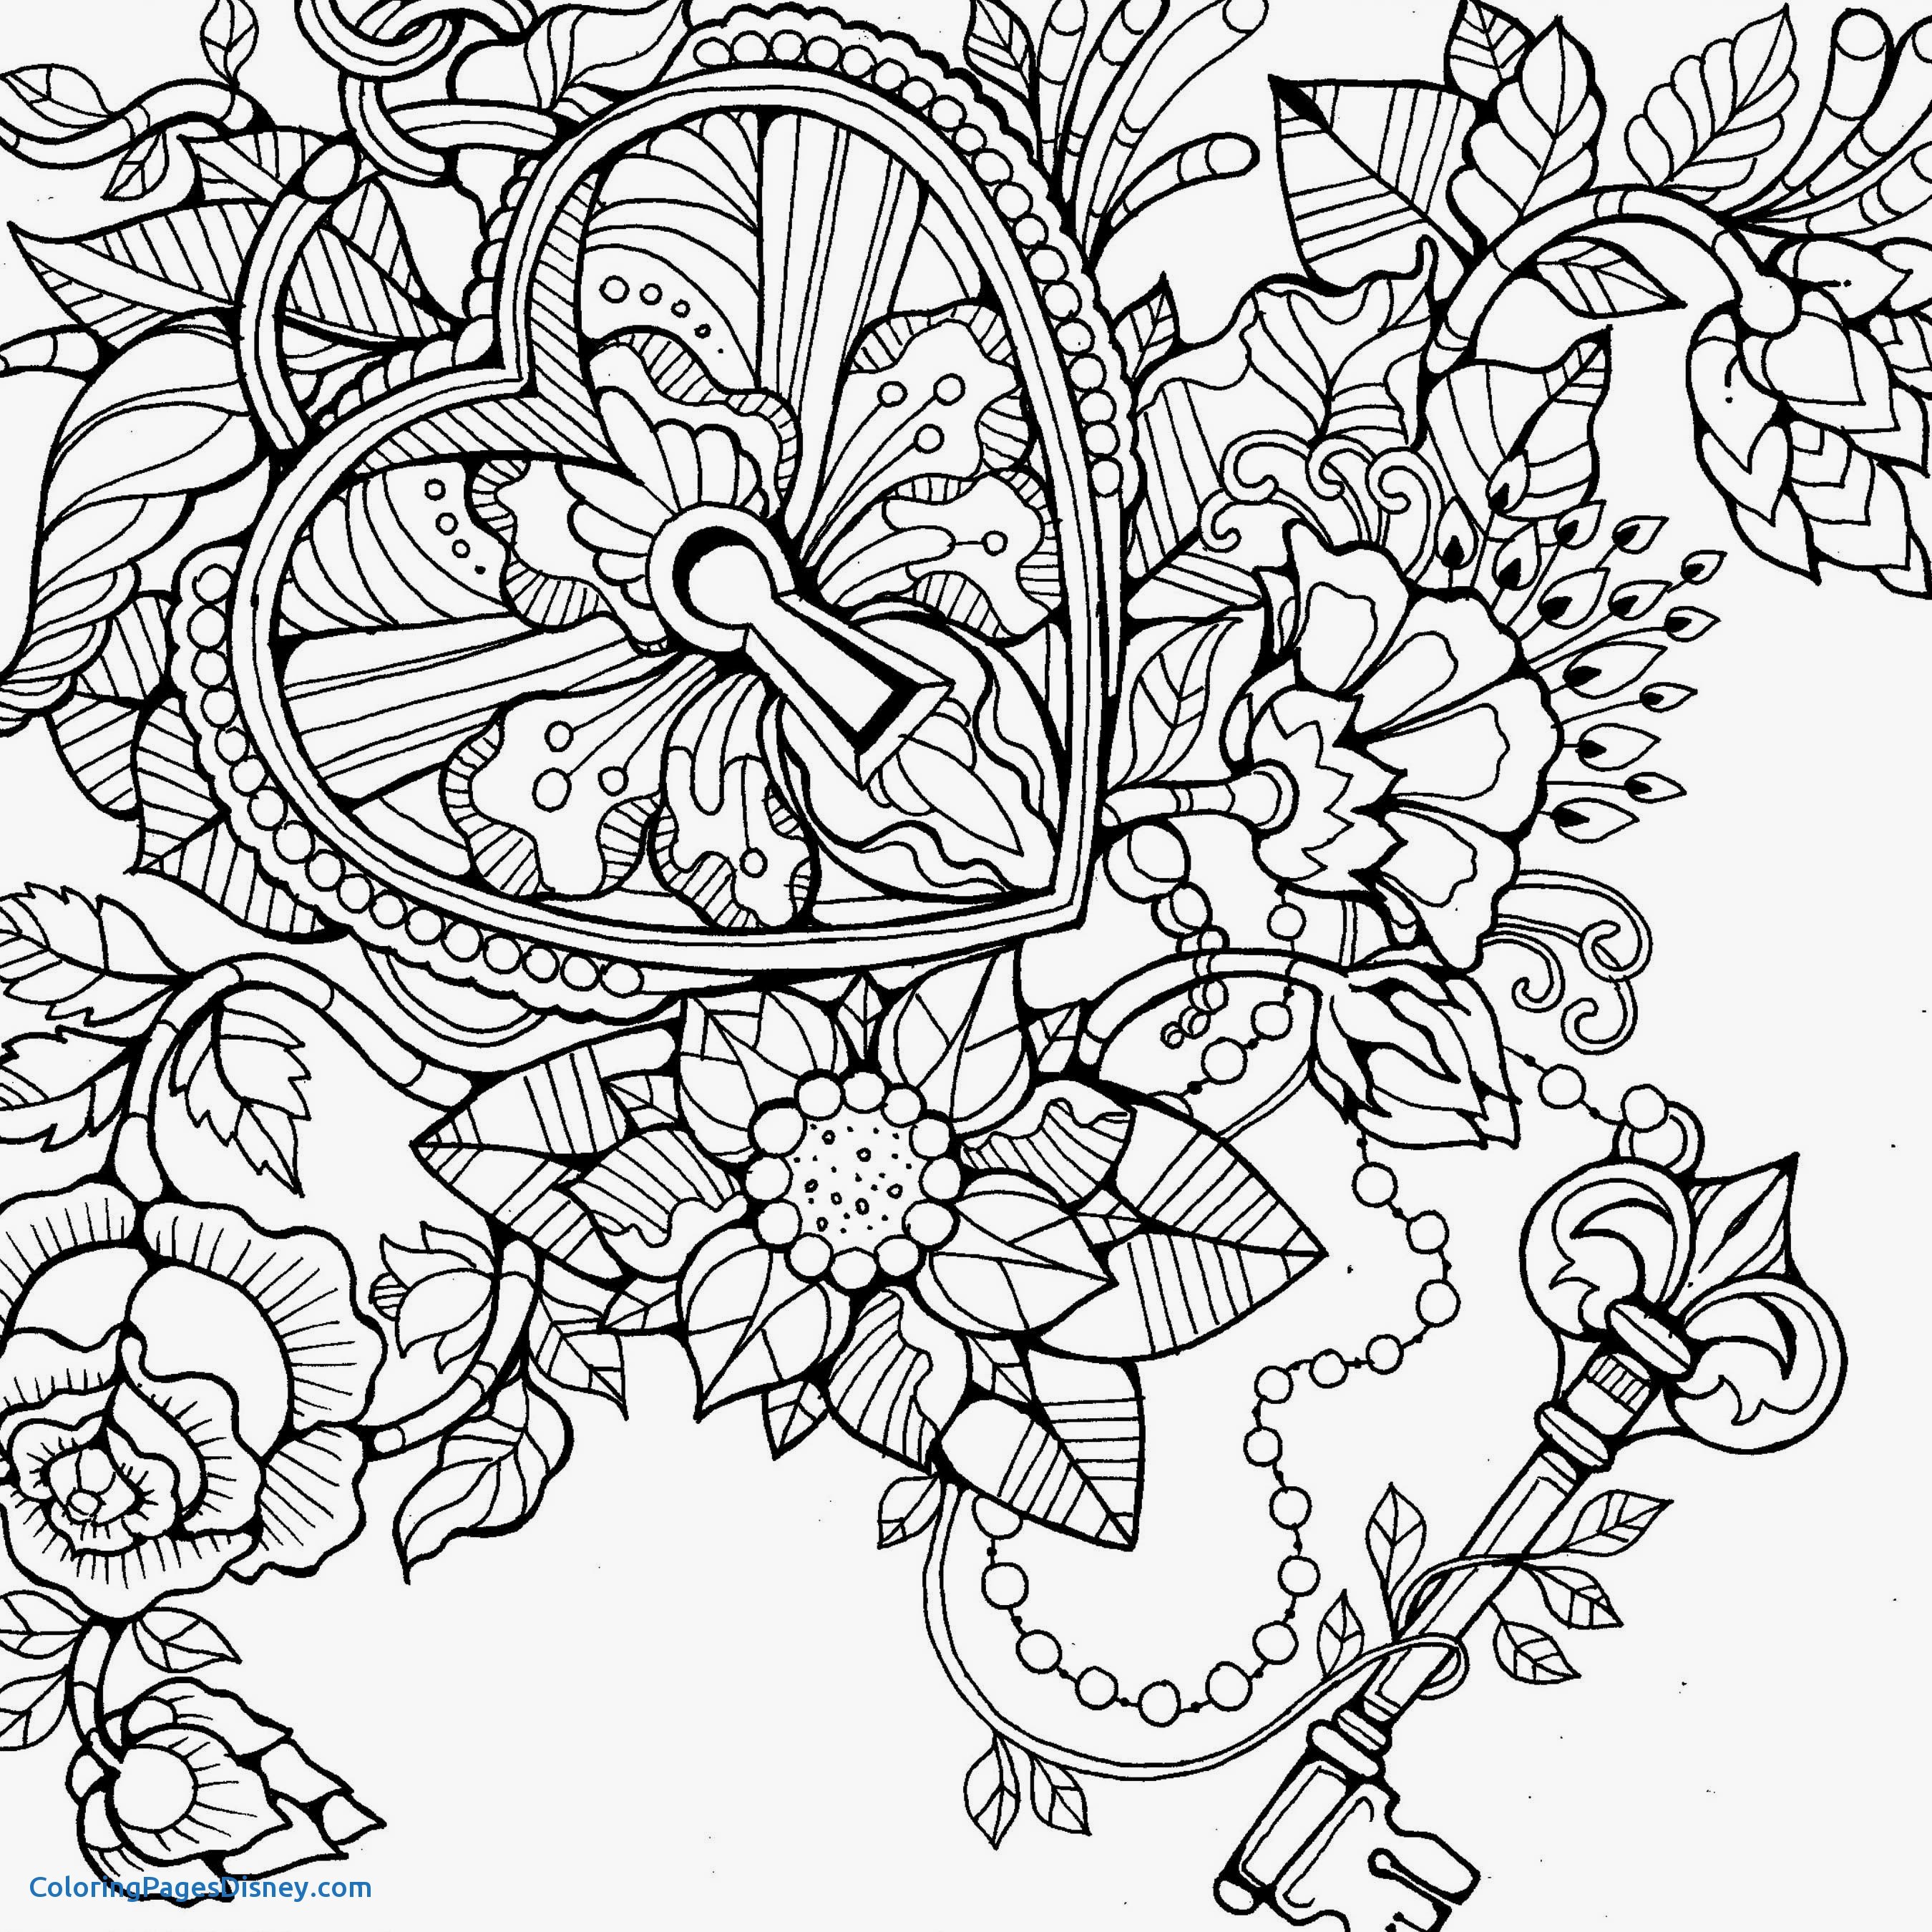 Hydrangea Coloring Page at GetColorings.com | Free printable colorings